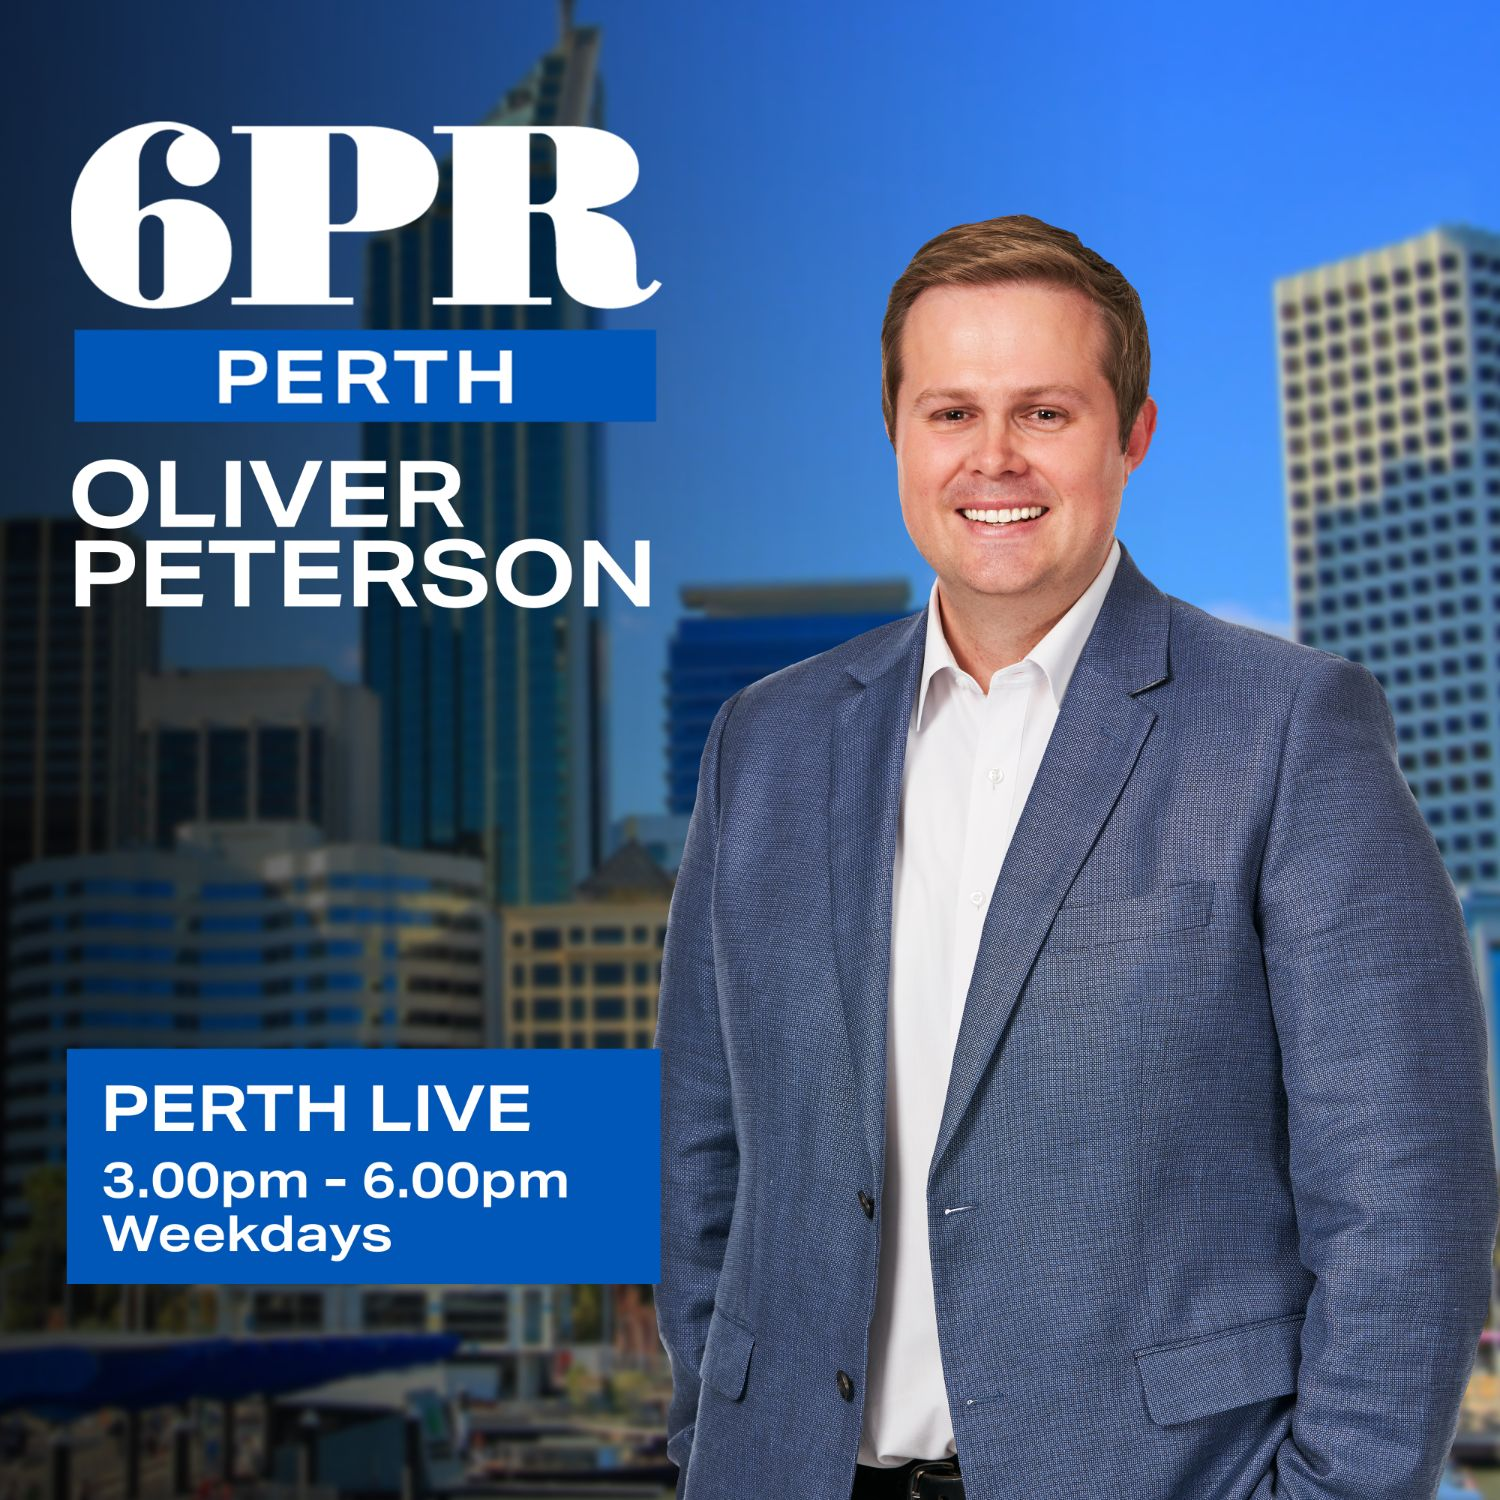 Perth LIVE secures delivery of listener's belongings